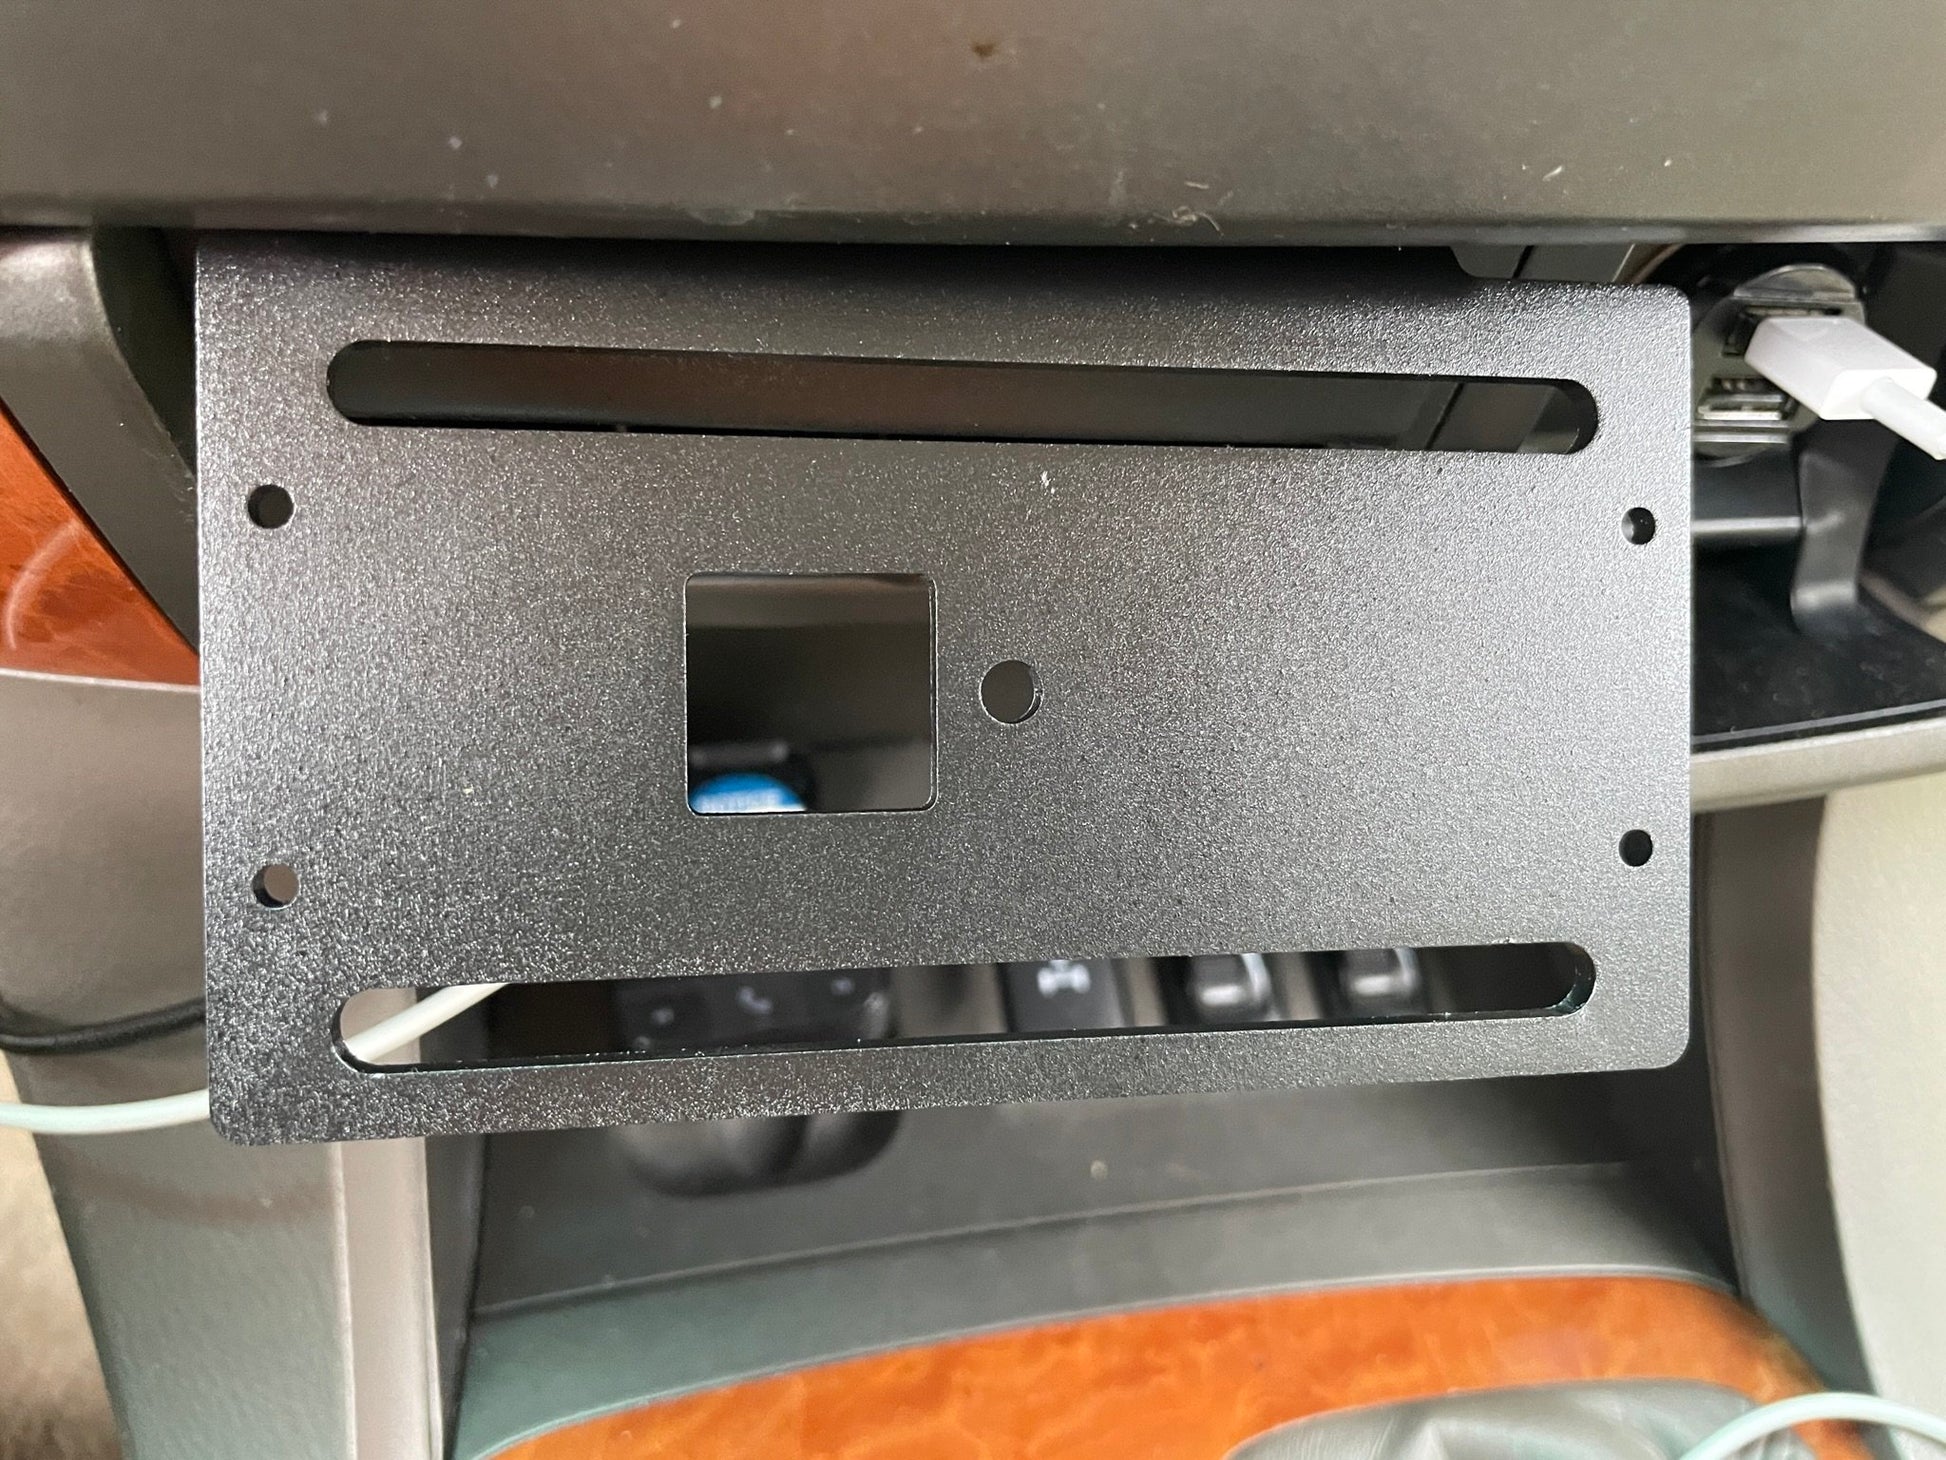 GX470 Ash Tray Replacement Accessory Mount - Go Xplore Basecamp